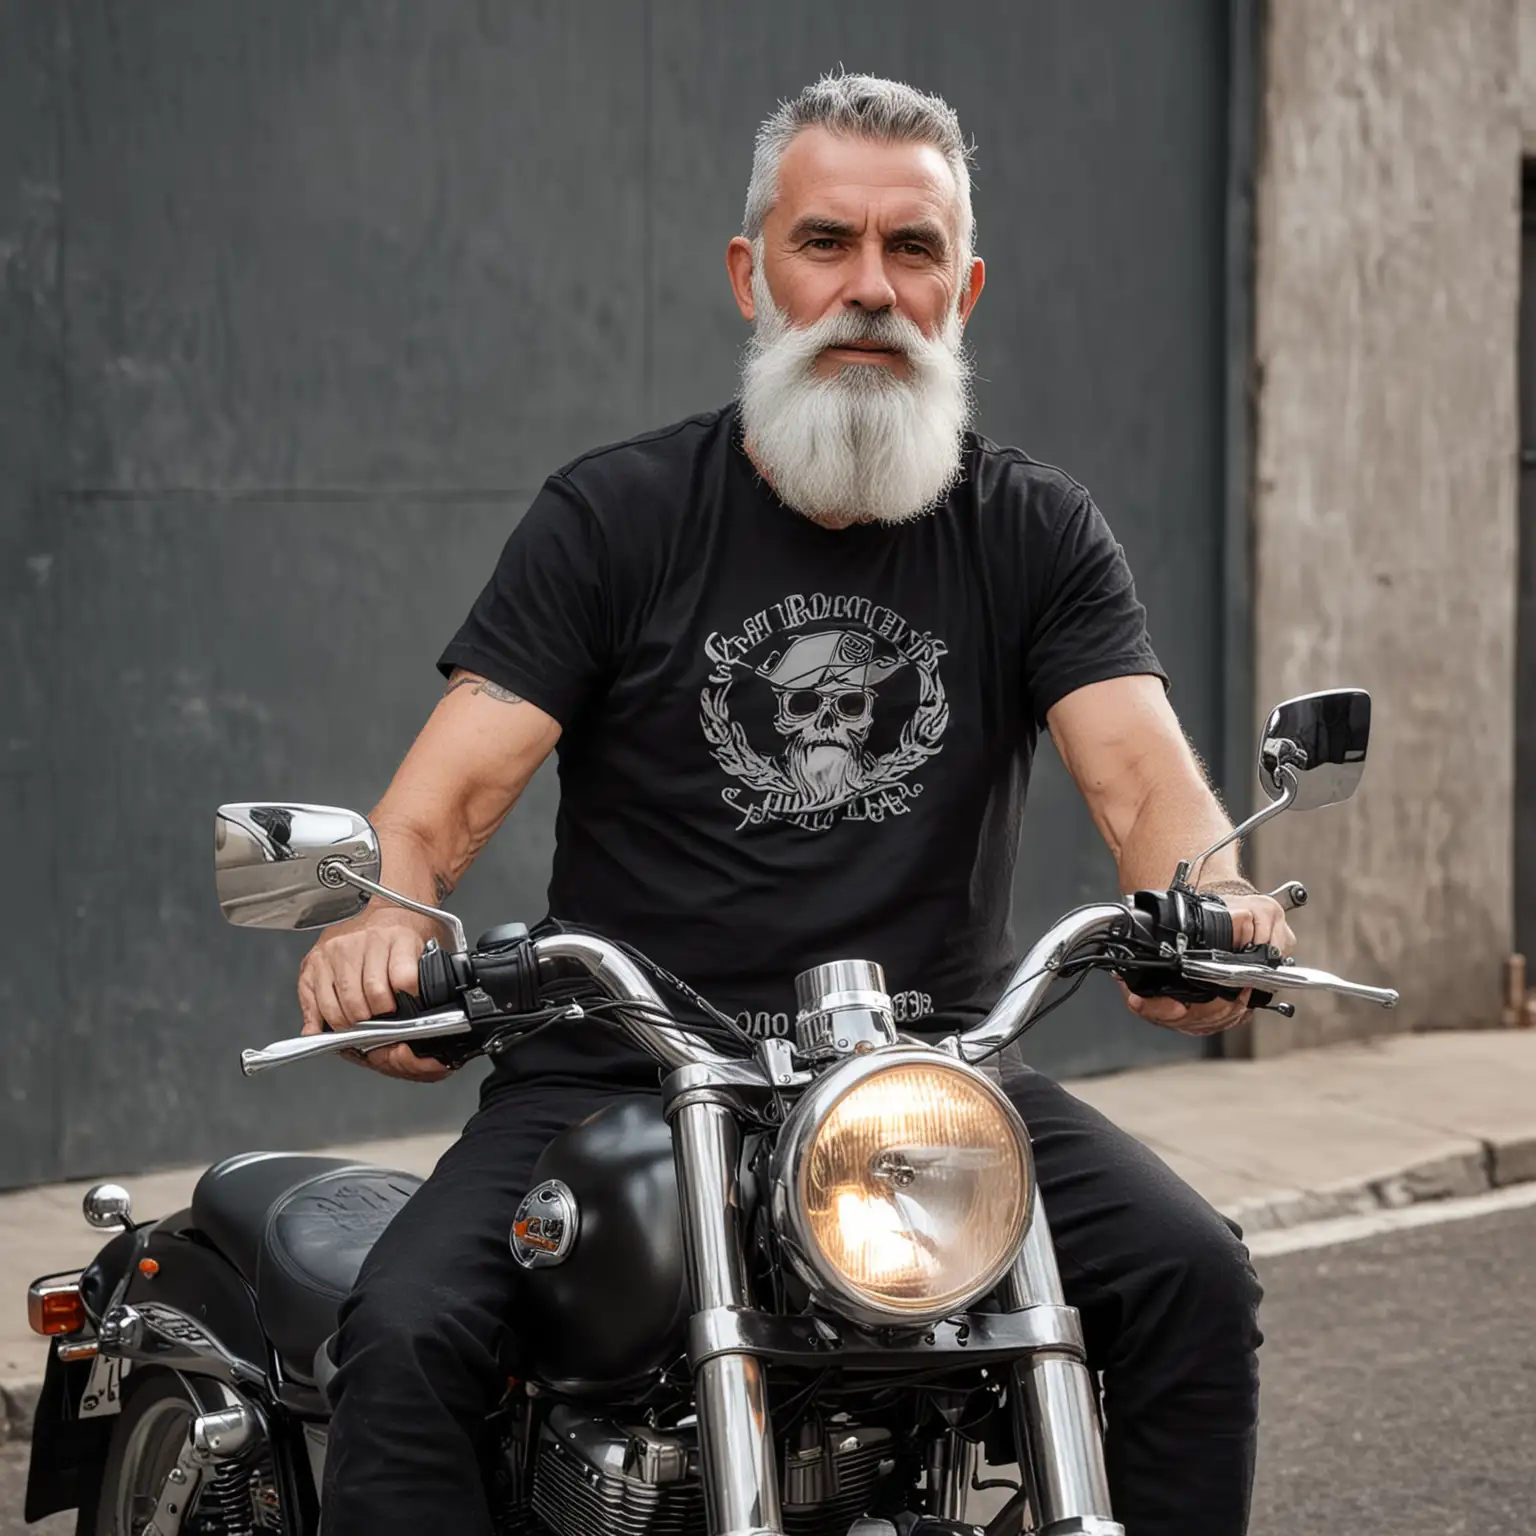 Mature Motorcyclist Riding Vintage Motorcycle